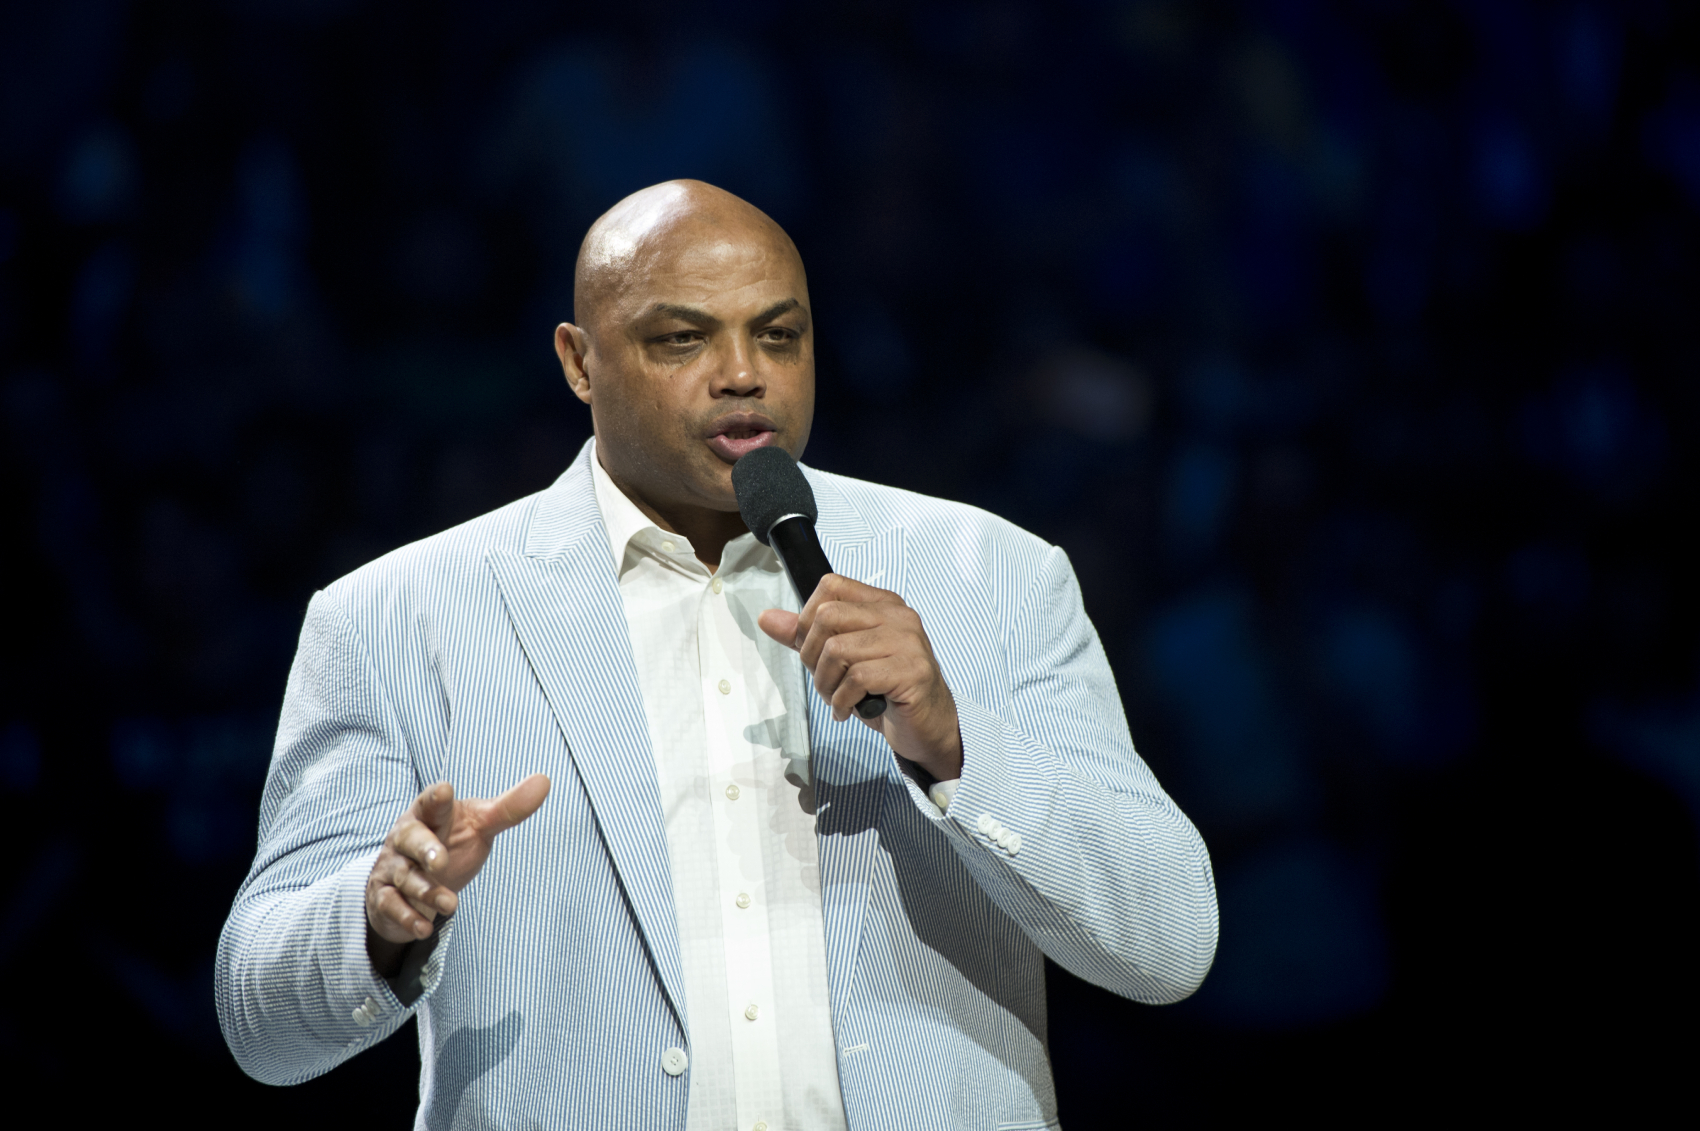 After taking a 2-0 lead, the LA Lakers now only lead the Heat 2-1 in the NBA Finals. Charles Barkley has since put them on notice.